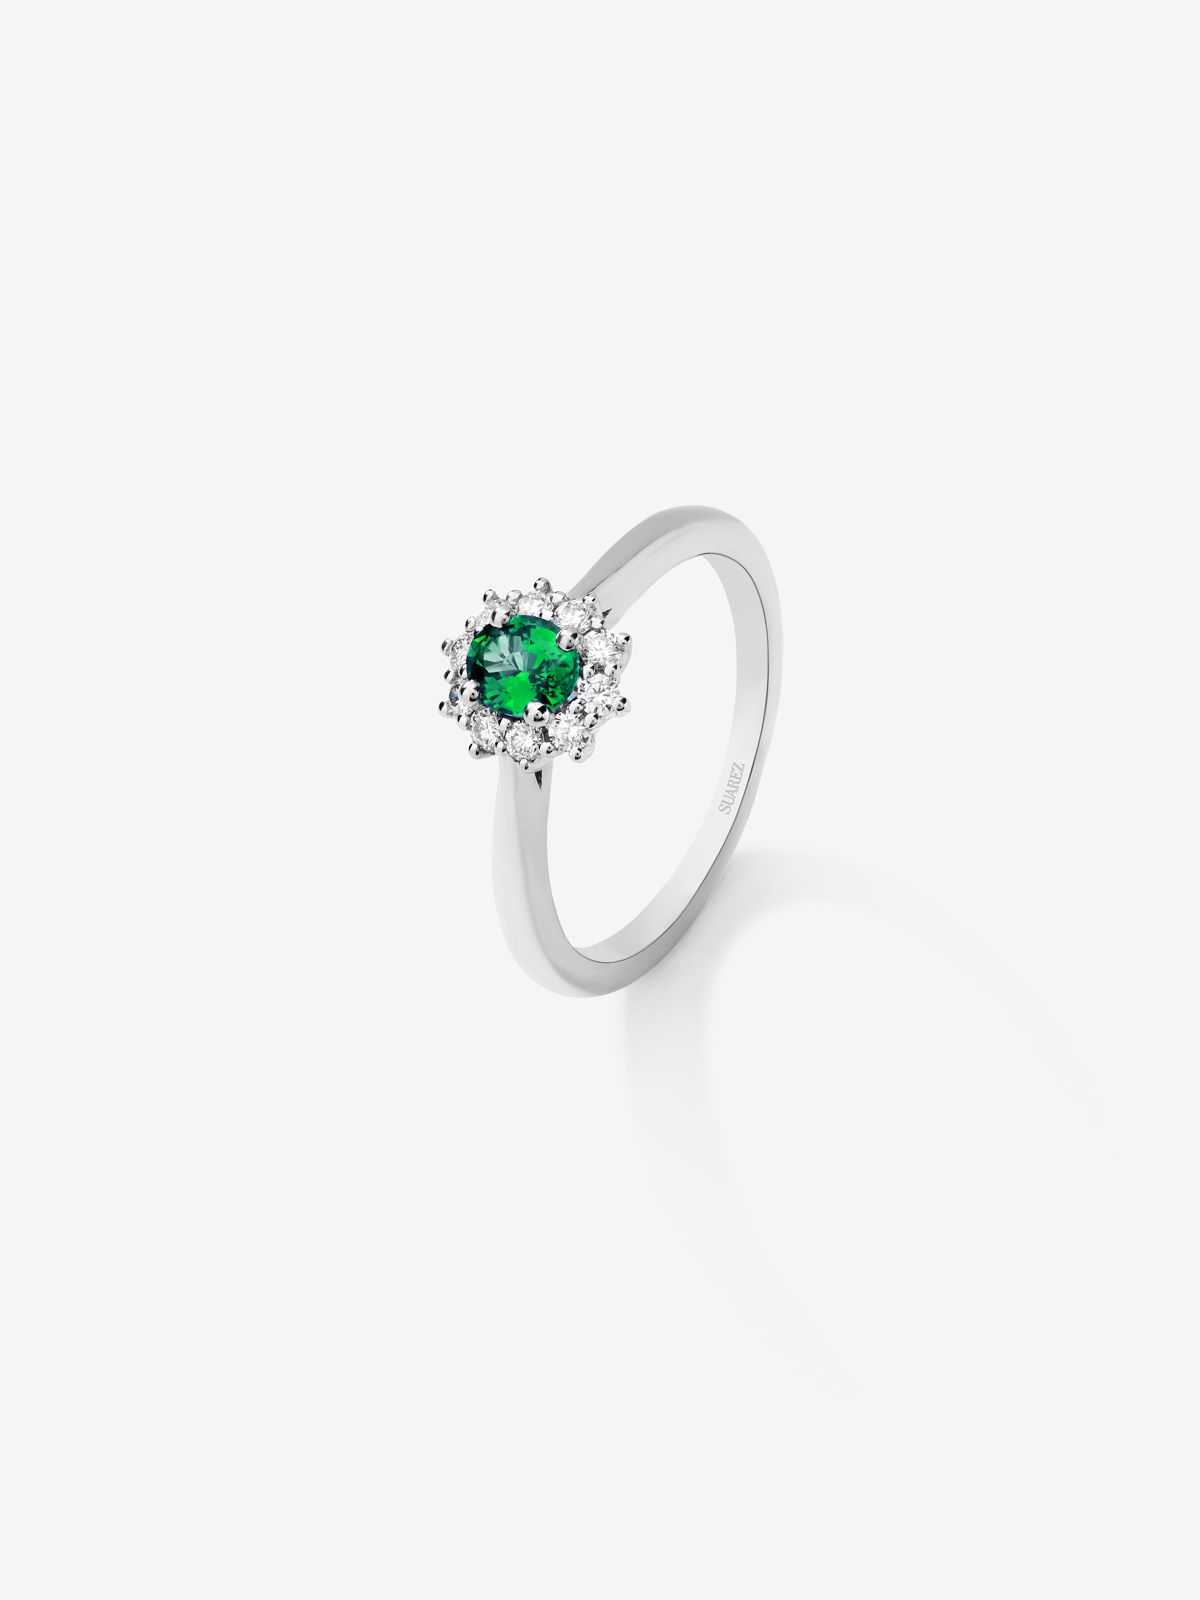 18K White Gold Ring with Emerald Green in 0.74 cts oval size and white diamonds of 0.25 cts